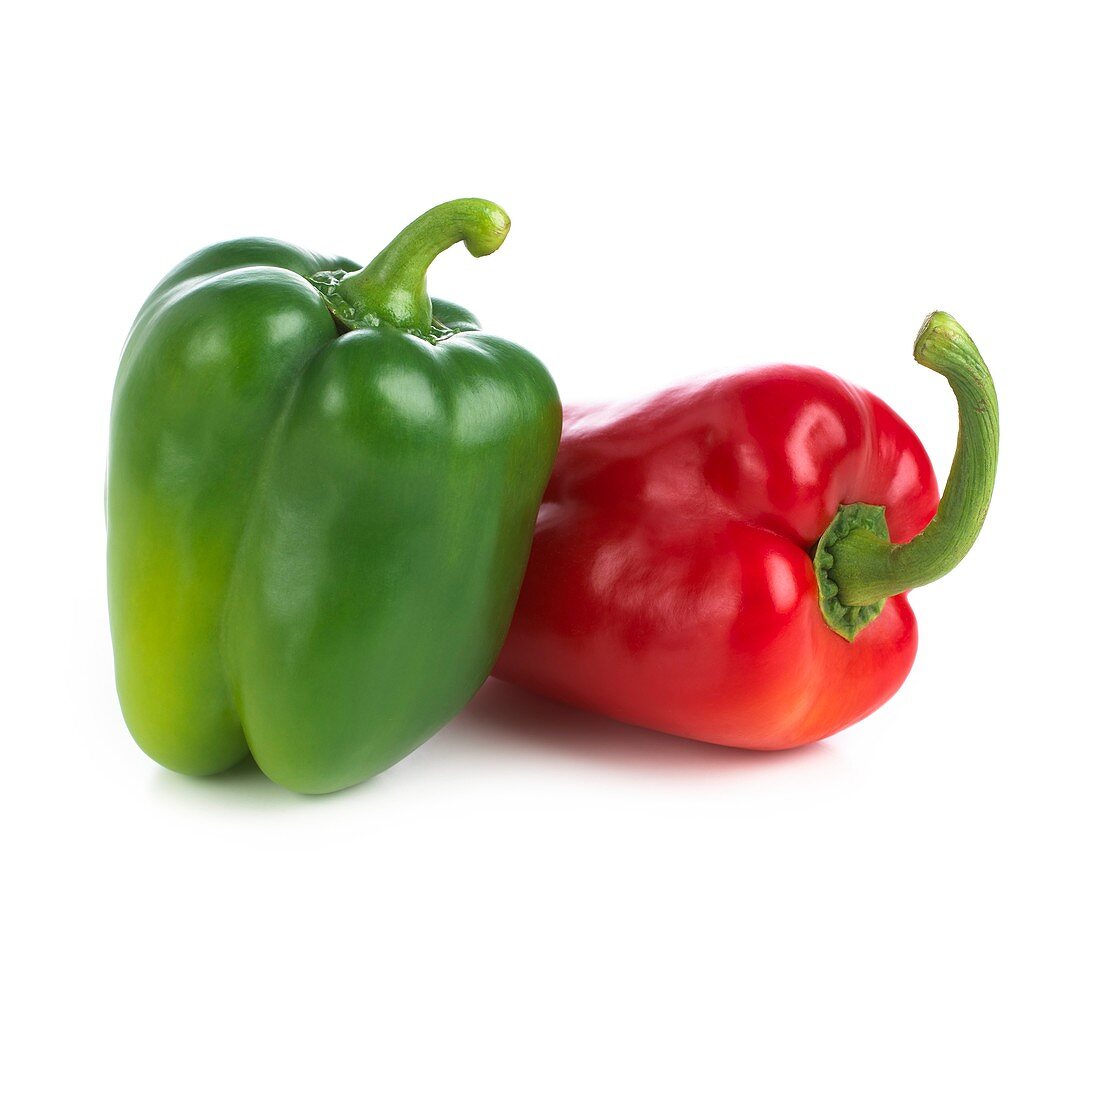 Red and green peppers